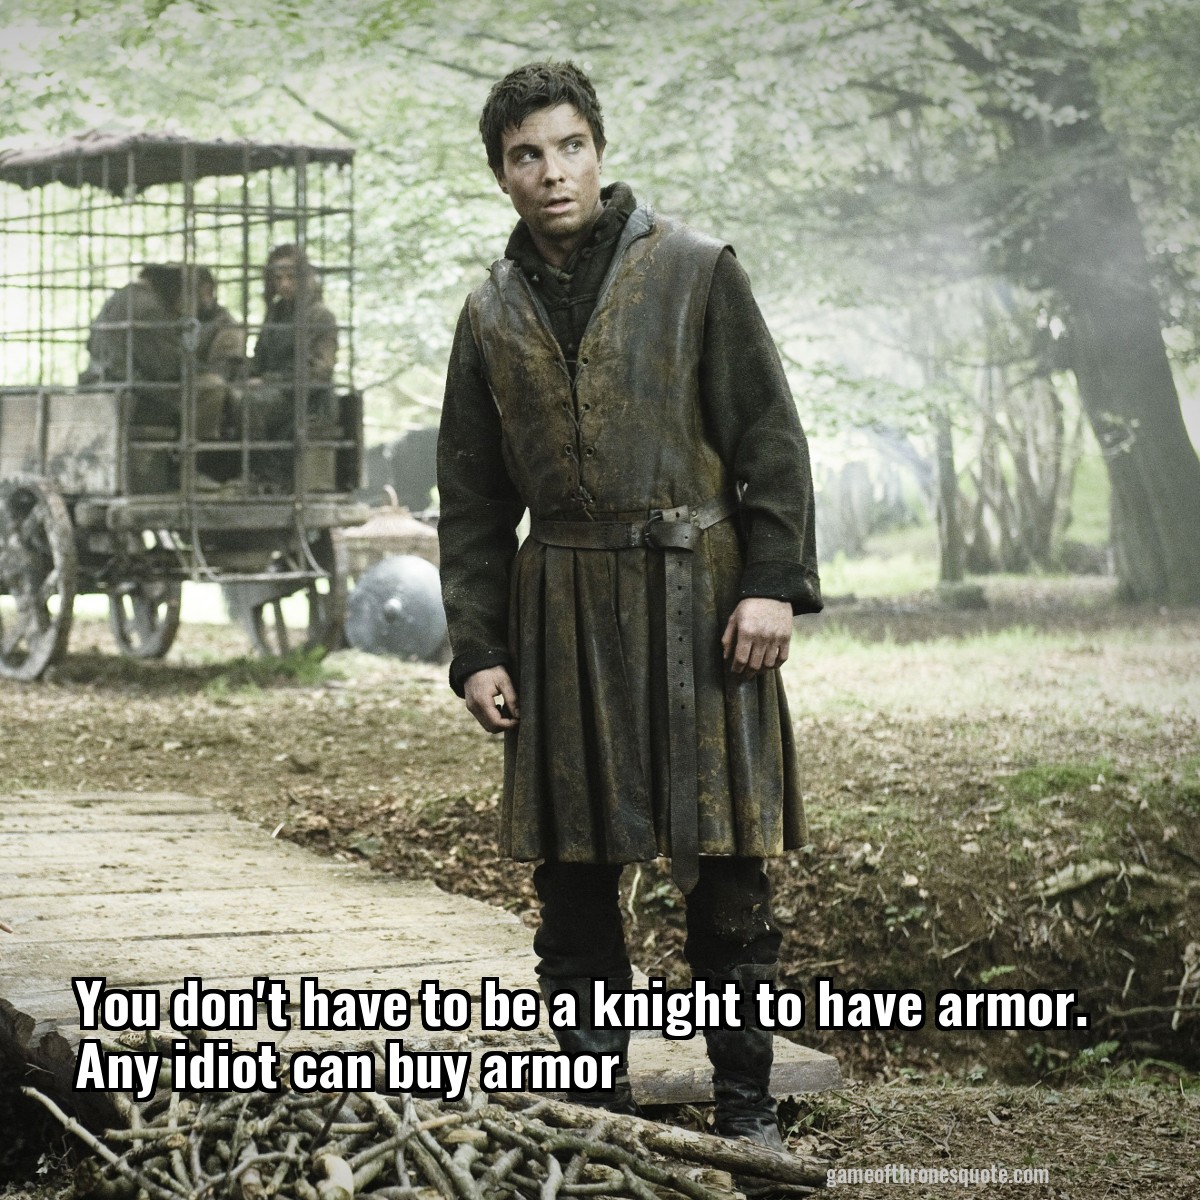 You don't have to be a knight to have armor. Any idiot can buy armor